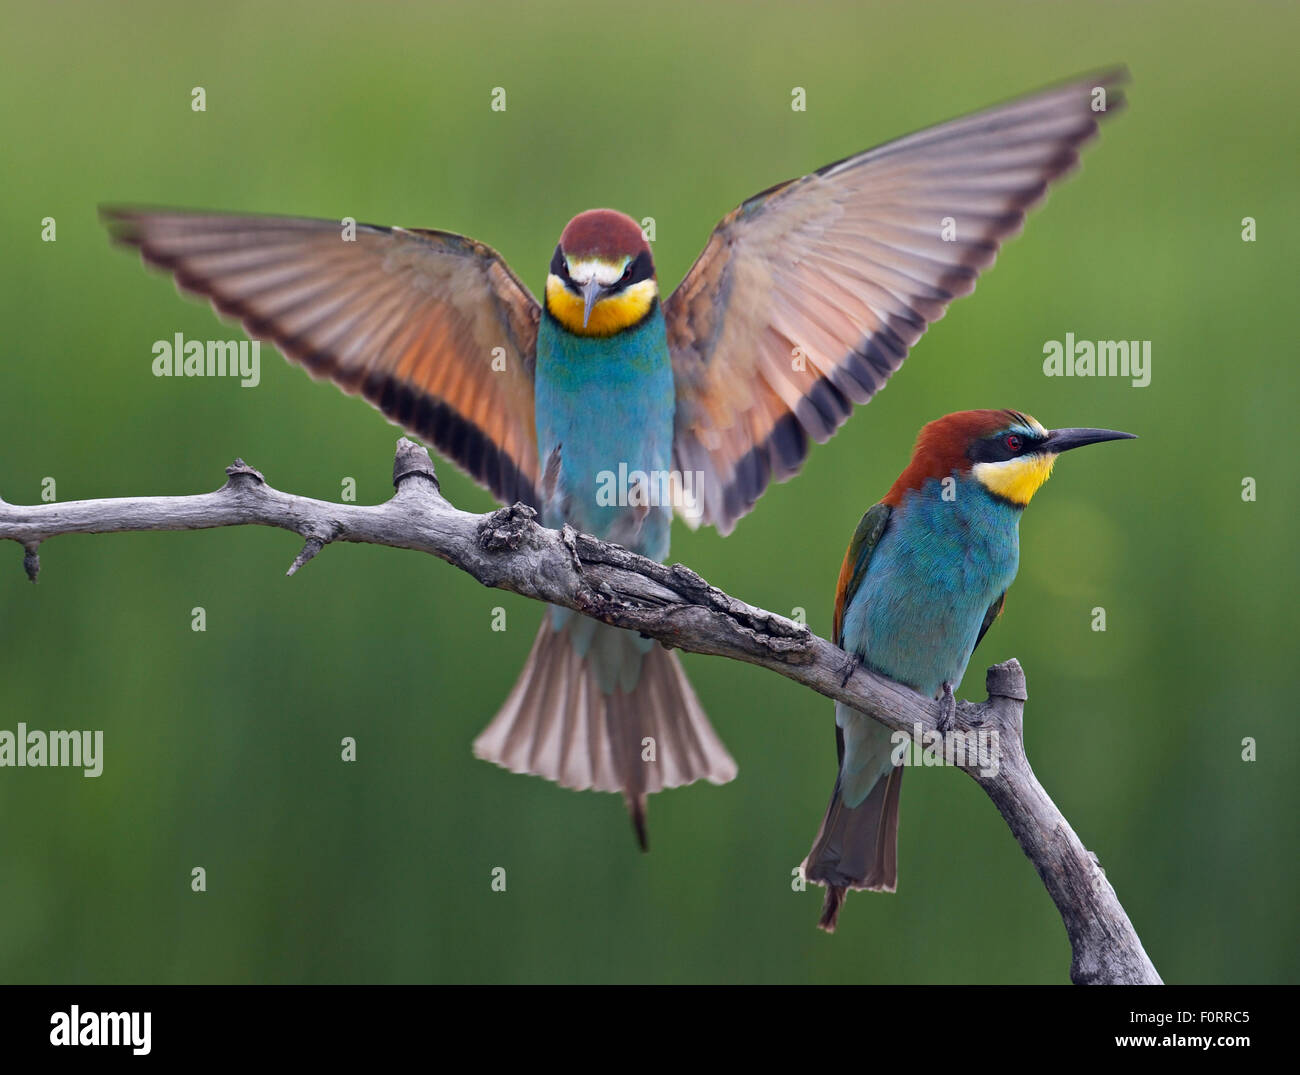 Two European Bee-eaters (Merops apiaster) on perch, one about to land with wings spread. Hungary, May. Wild Wonders of Europe, Magic Moments Book. Stock Photo